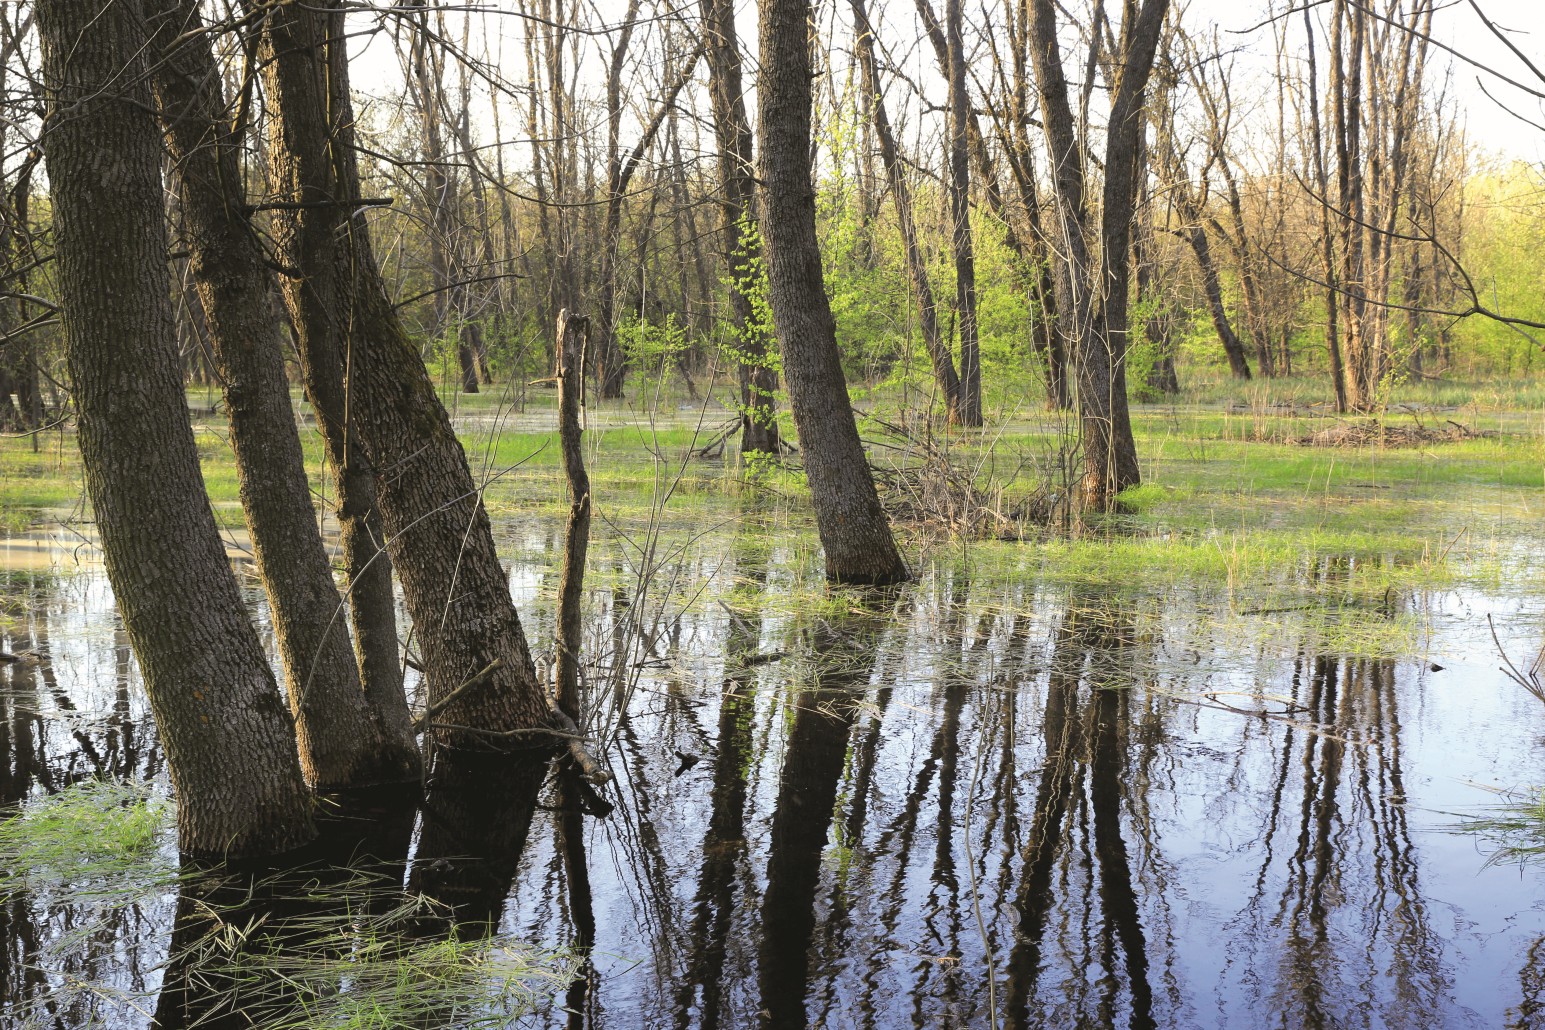 The picture shows a flooded deciduous forest.